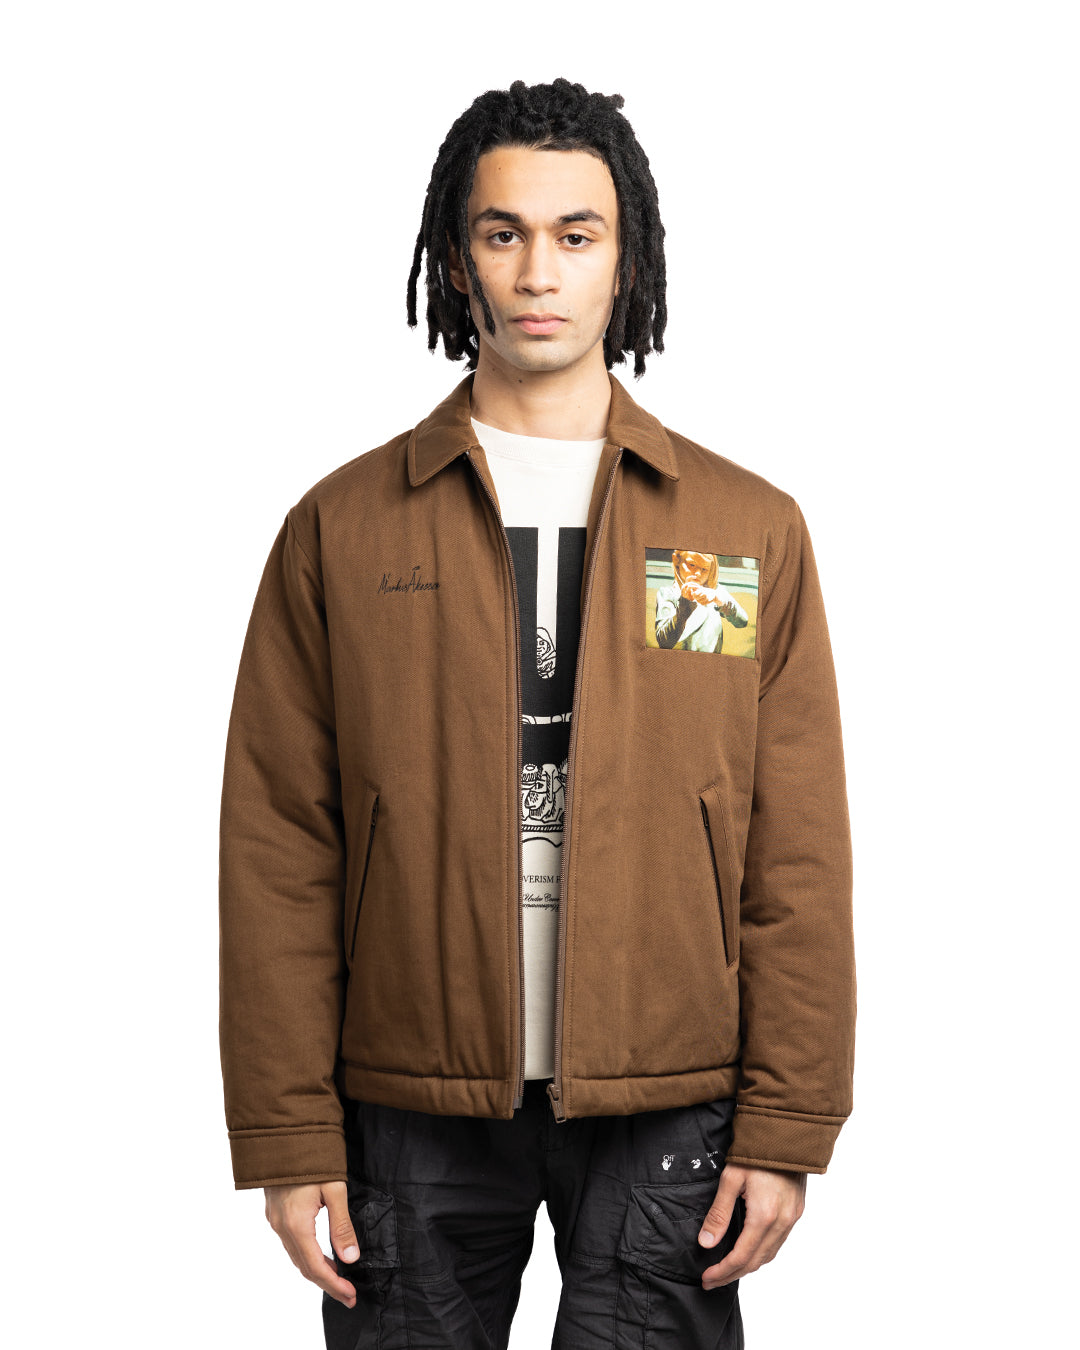 Undercover x Markus Arkesson UC2A4202-1 Jacket Brown